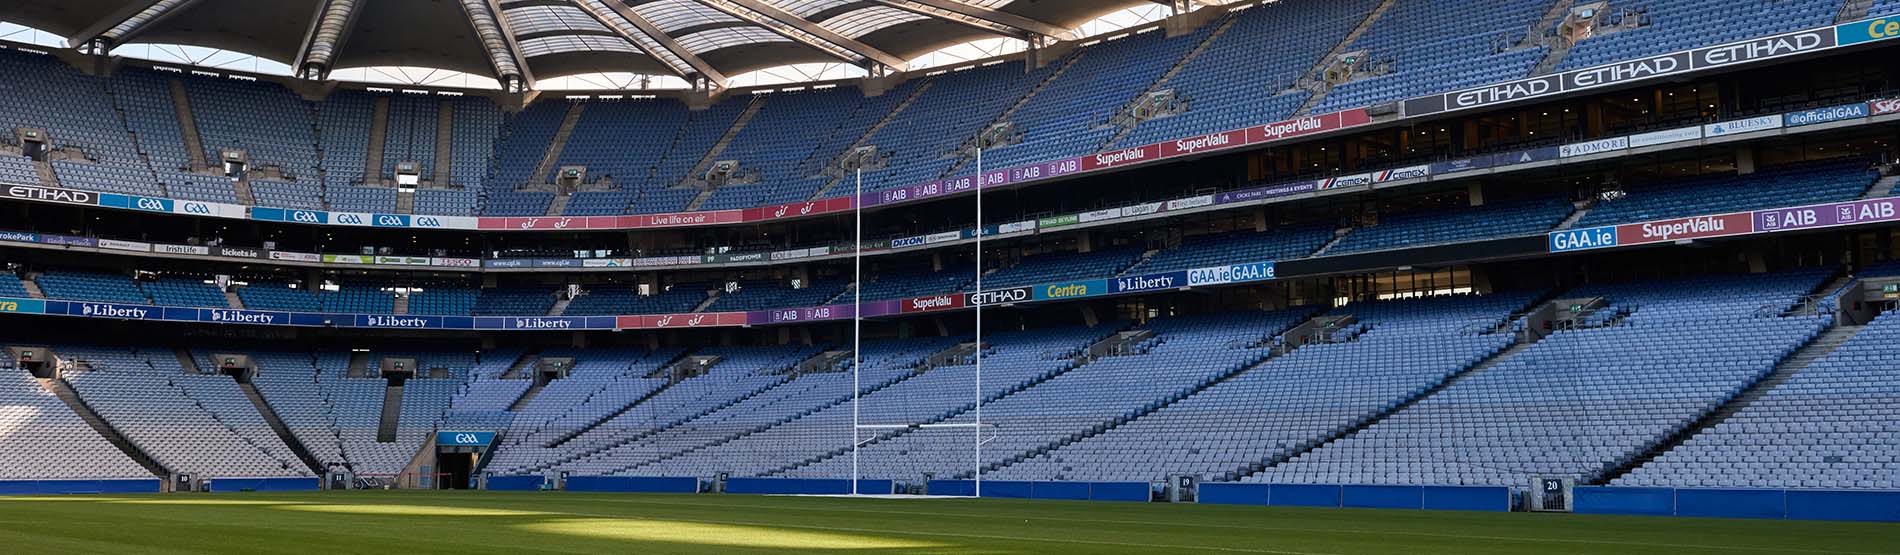 Family hotel stays with The Croke Park